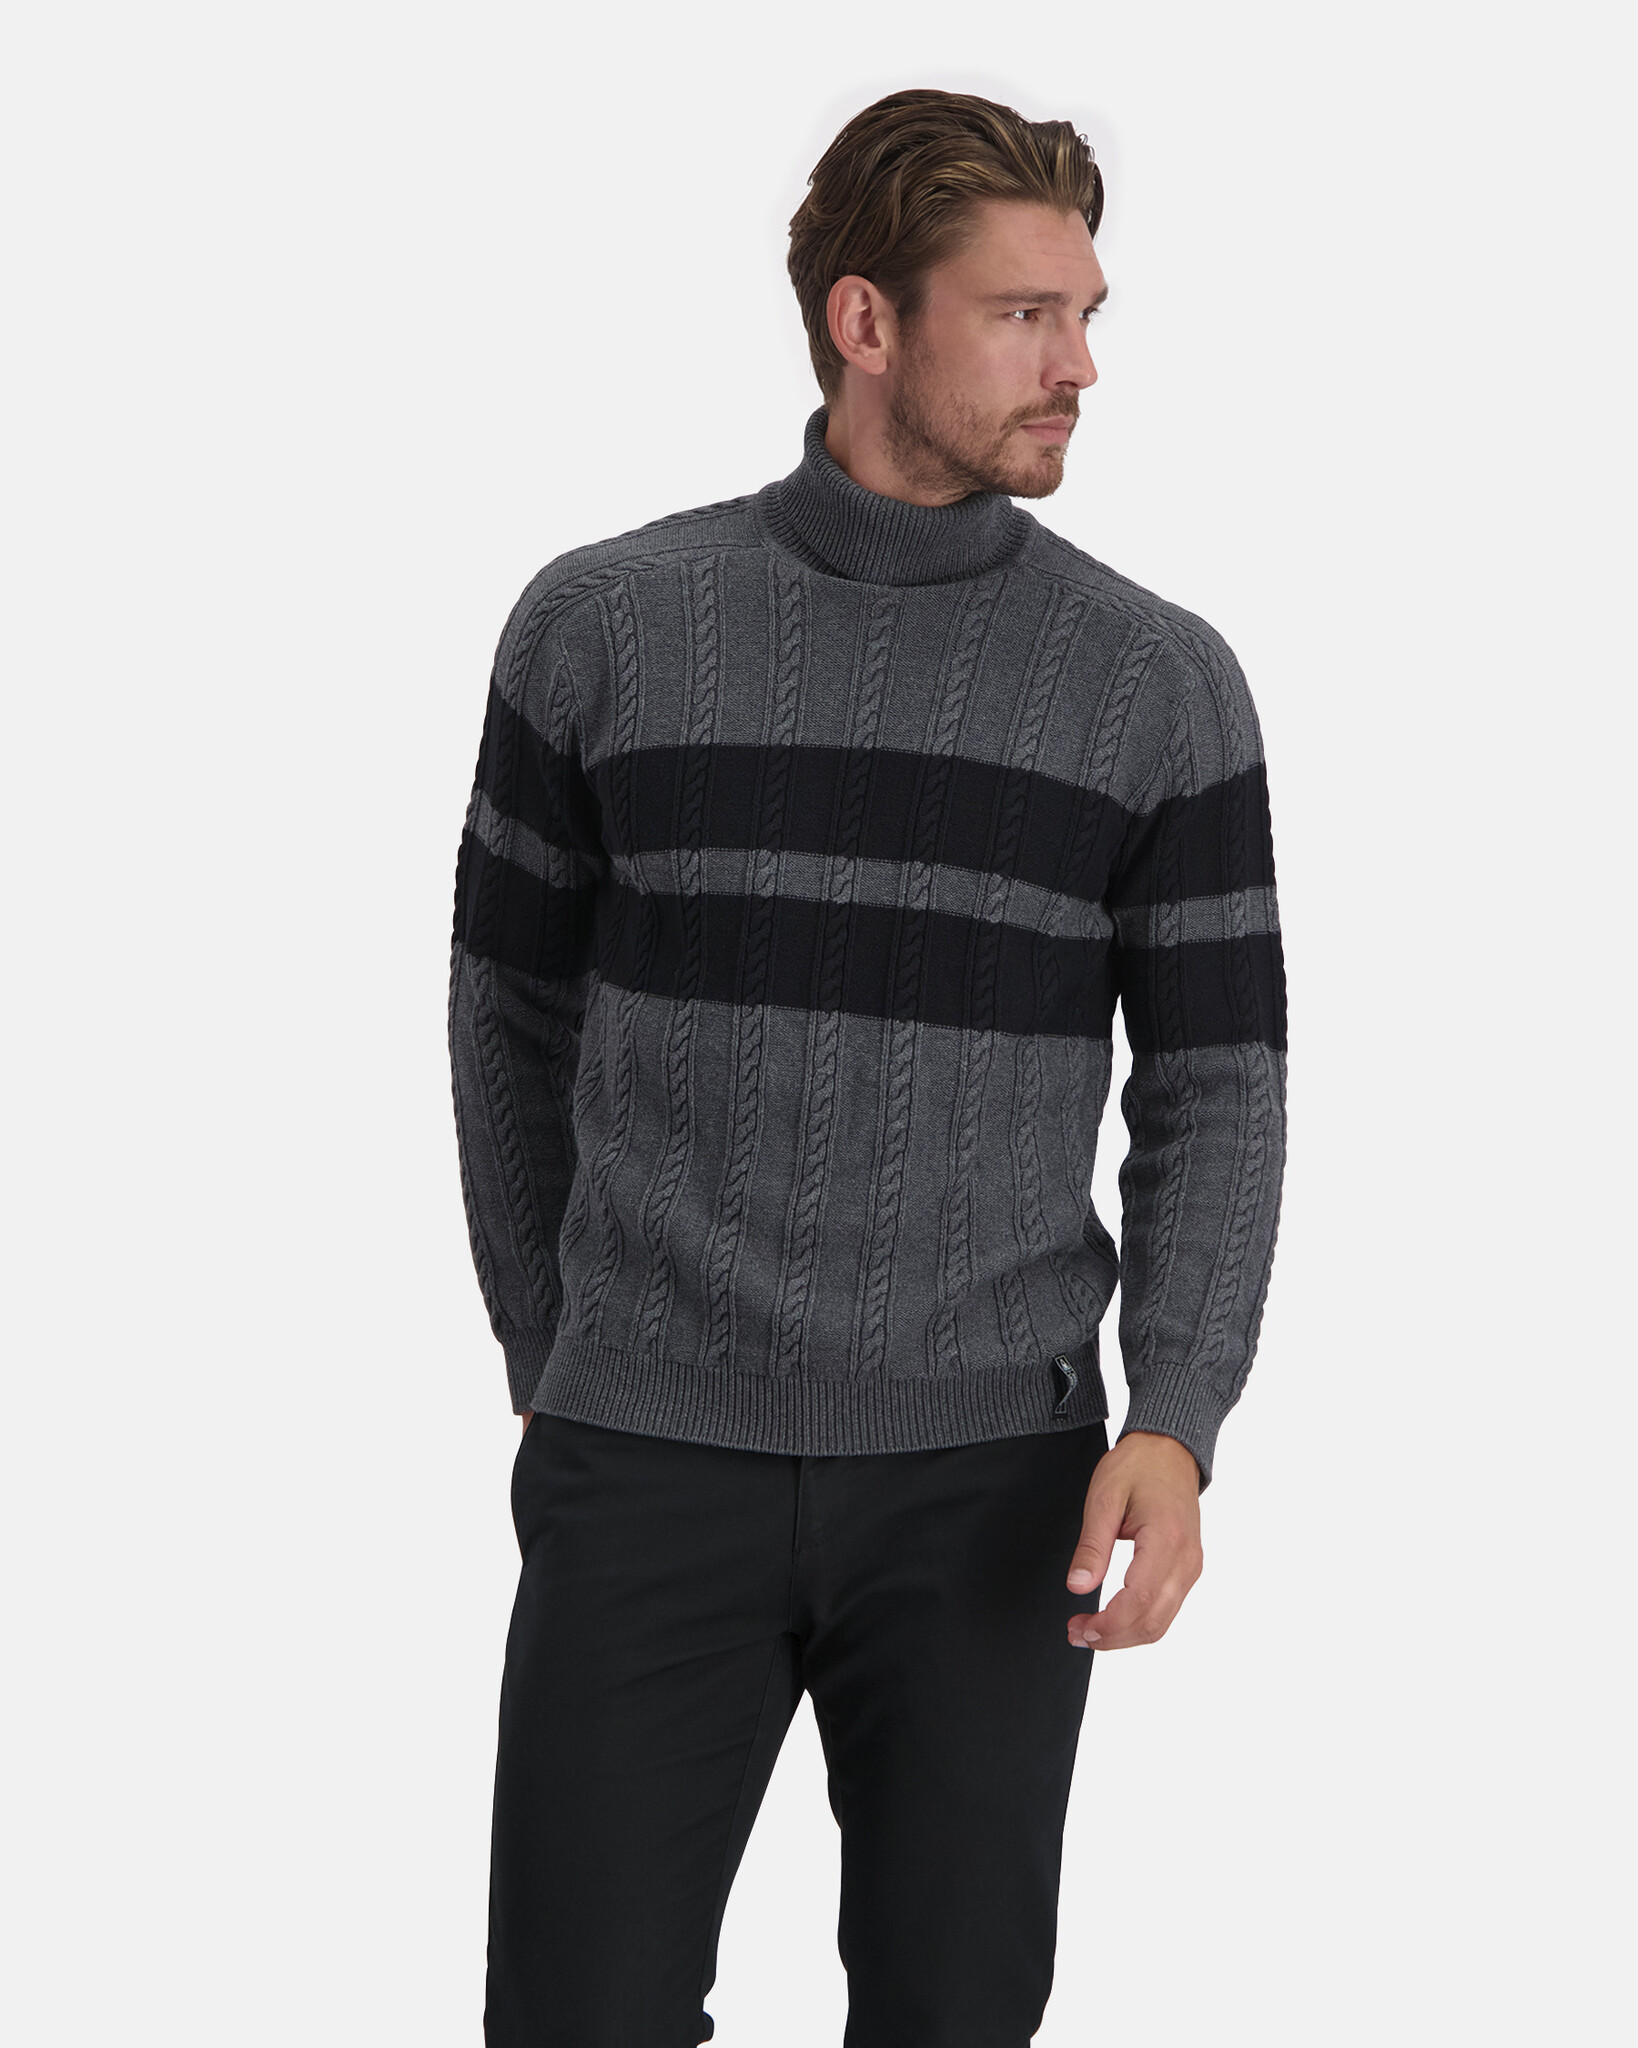 The cable knitted Move Over Roll Sweater